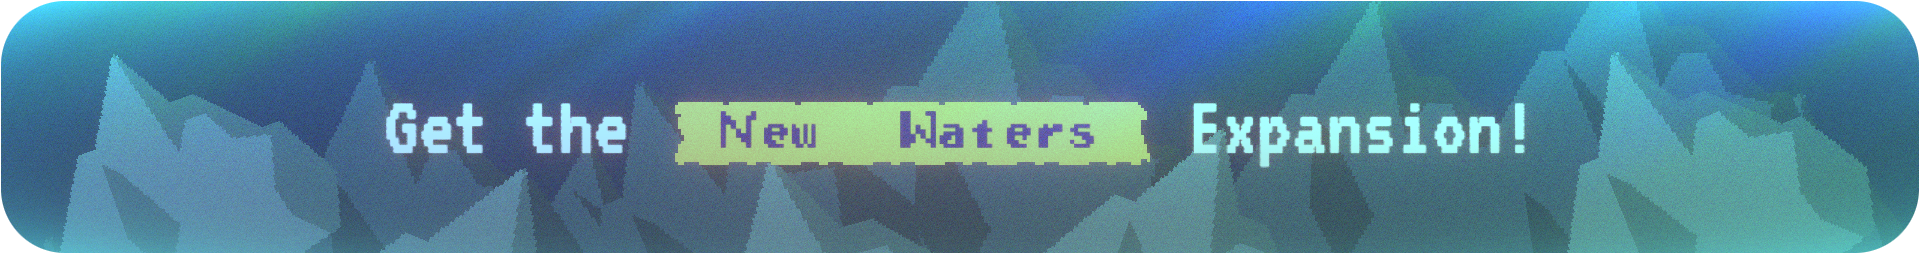 Get the "New Waters" Expansion